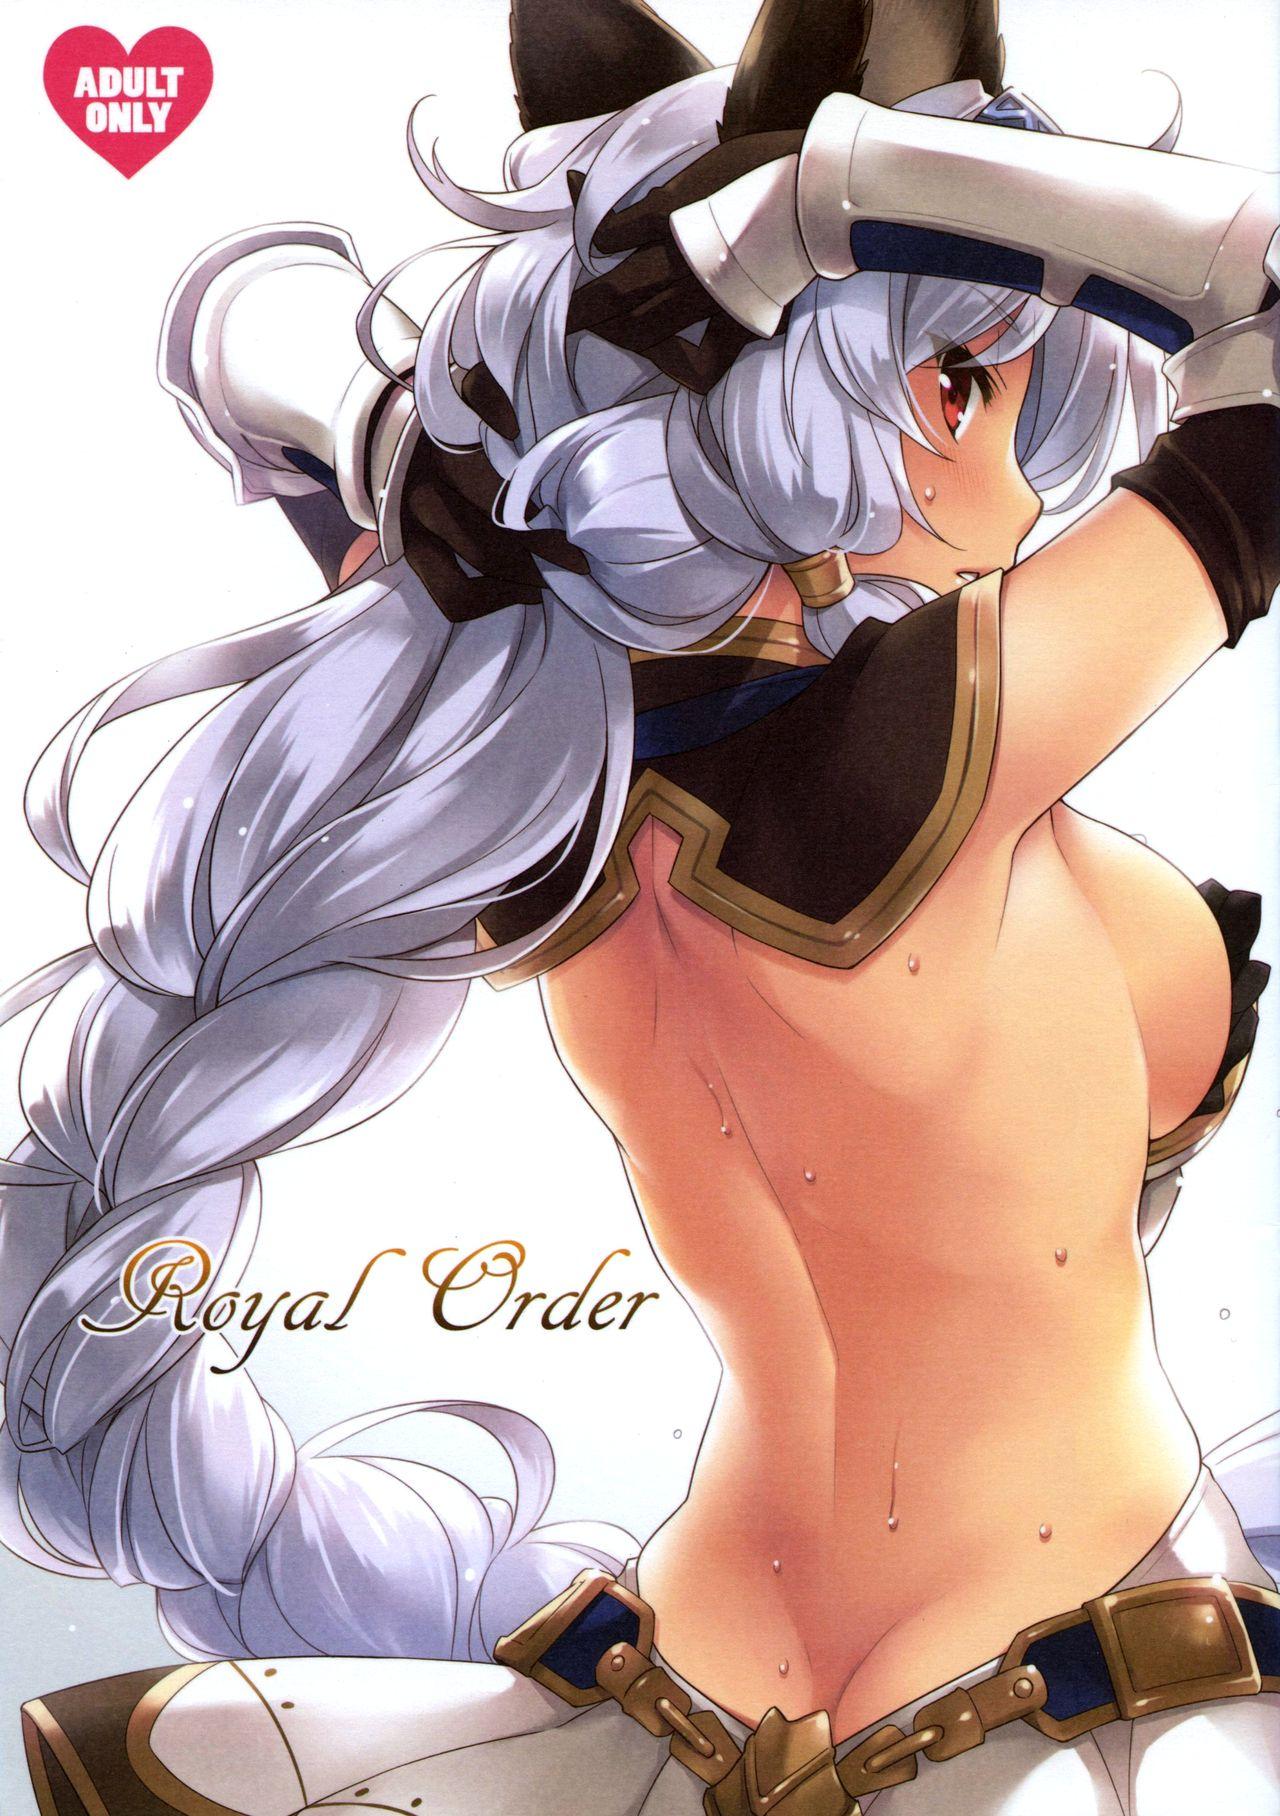 Ex Girlfriends Royal Order - Granblue fantasy Twink - Page 1